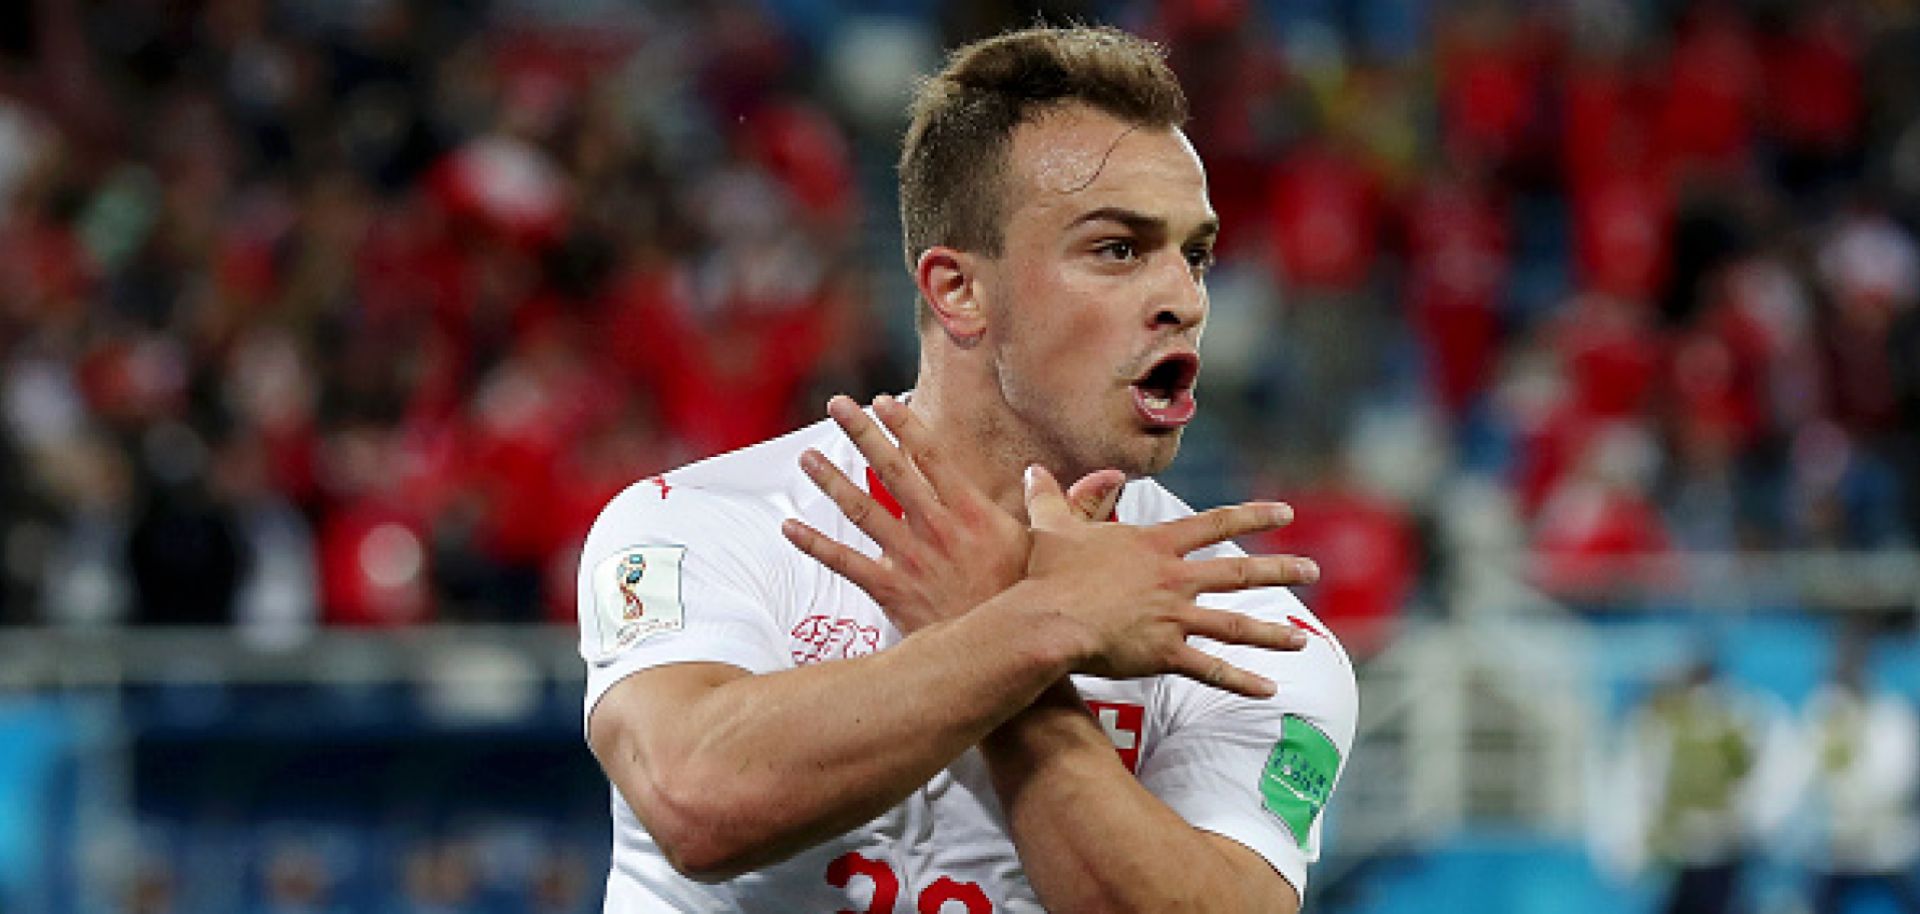 Swiss player Xherdan Shaqiri's celebration after scoring a World Cup goal against Serbia included flashing the Albanian eagle. Shaqiri was born in Kosovo, whose ethnic Albanian population fought a destructive conflict with Serbia in the 1990s.